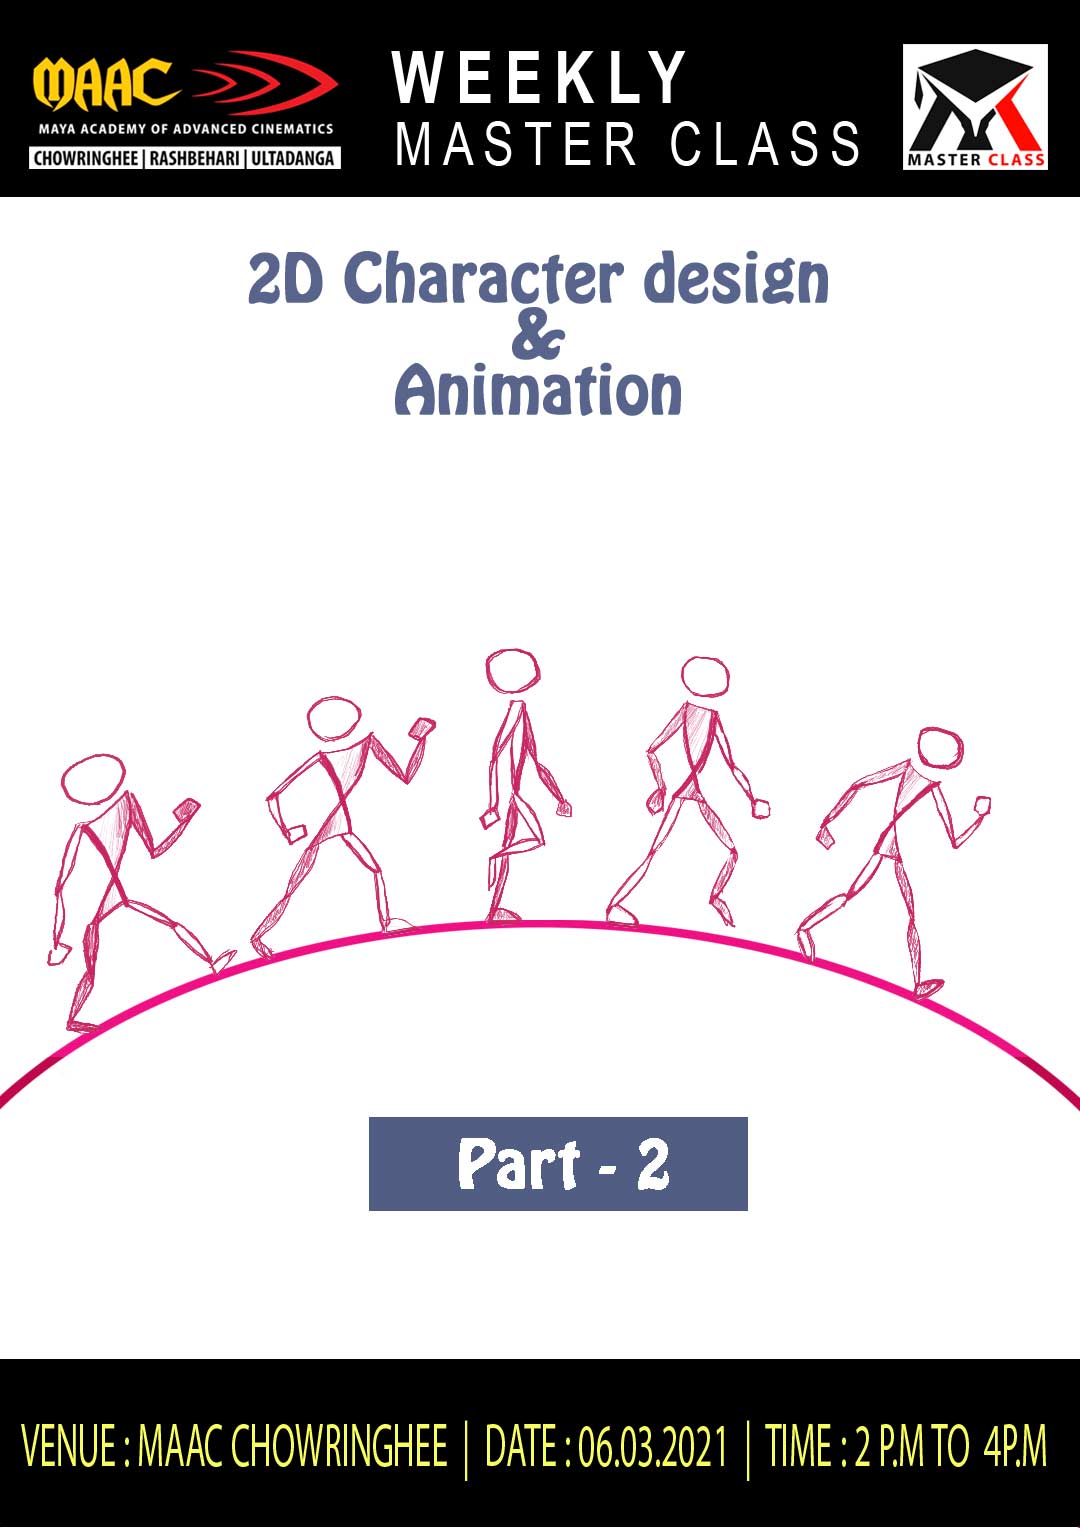 Weekly Master Class on 2D Character Design & Animation